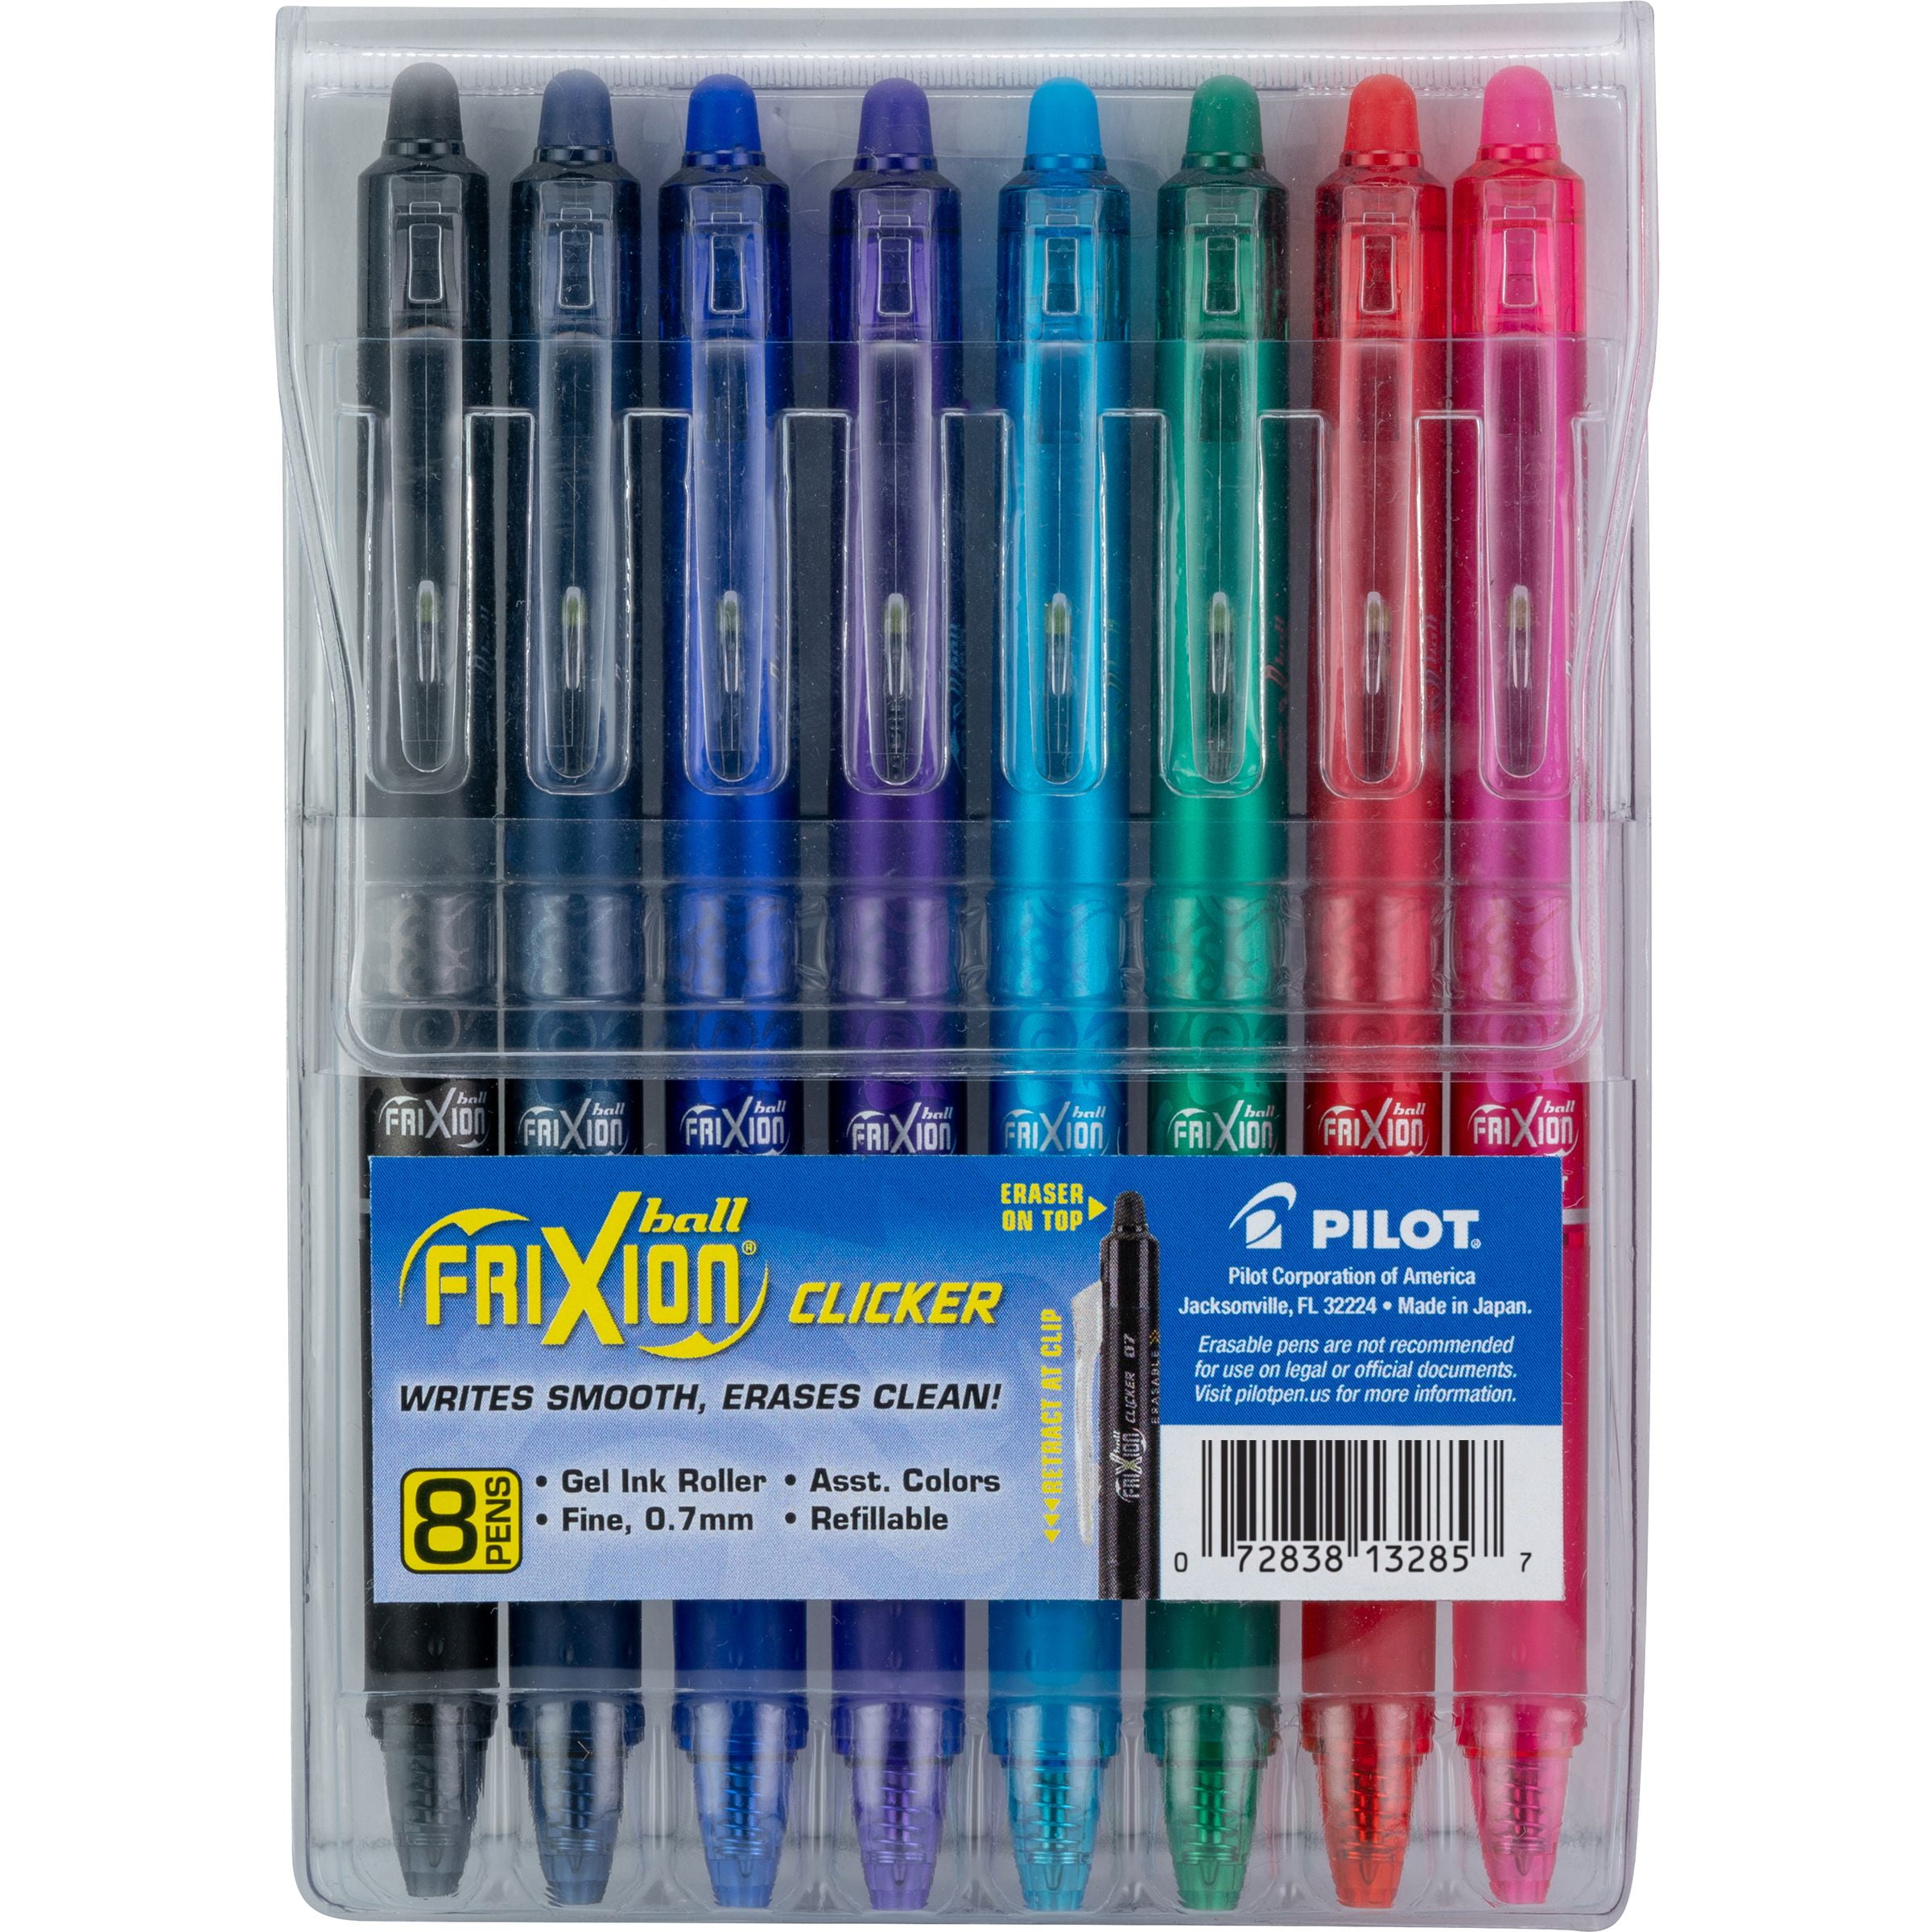 Make Mistakes Disappear Comfort Grip for Drawing Writing Planner and School Supplies 8 Pack Retractable Erasable Gel Pens Clicker Fine Point 0.7mm Assorted Color Inks